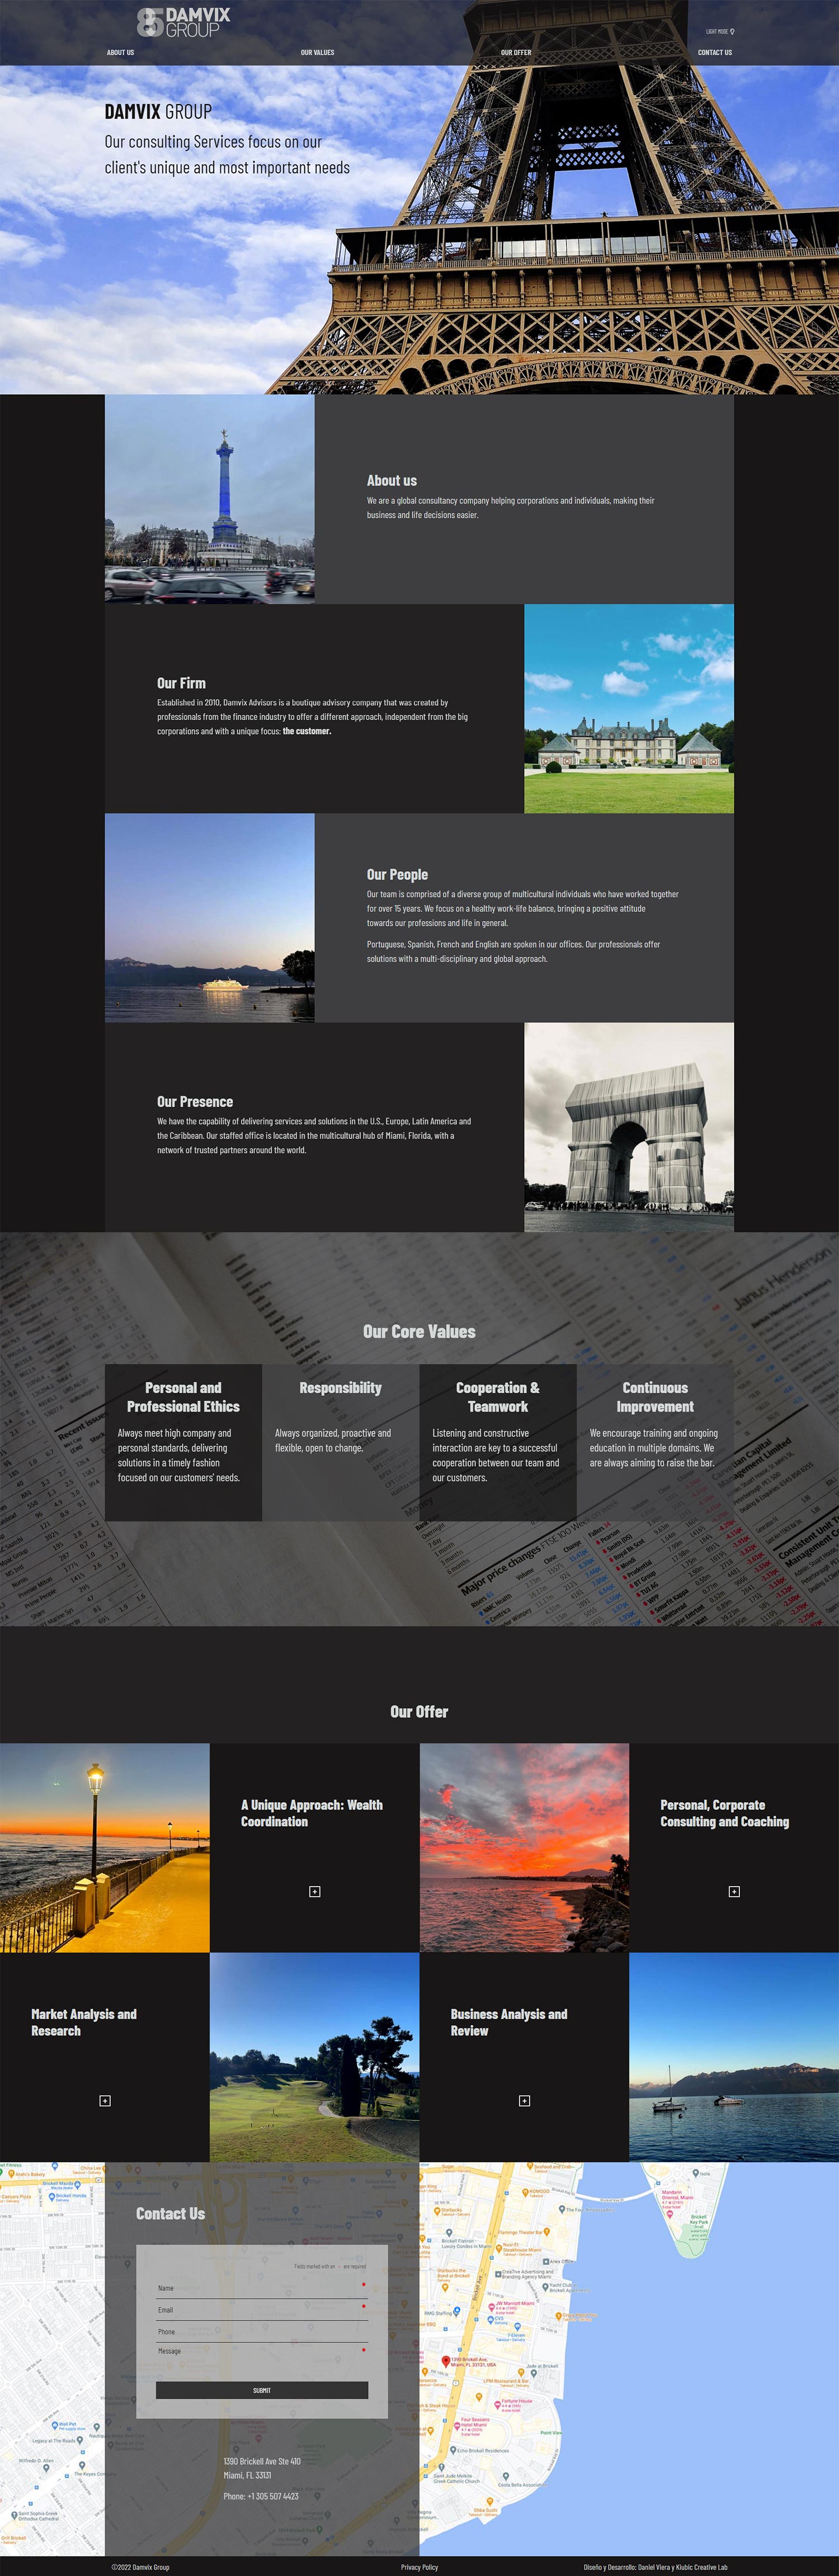 Damvix Group | Consulting Finantial Services firm web page. One infinite scroll page.  Site developed with WordPress, bootstrap 4 and sass.